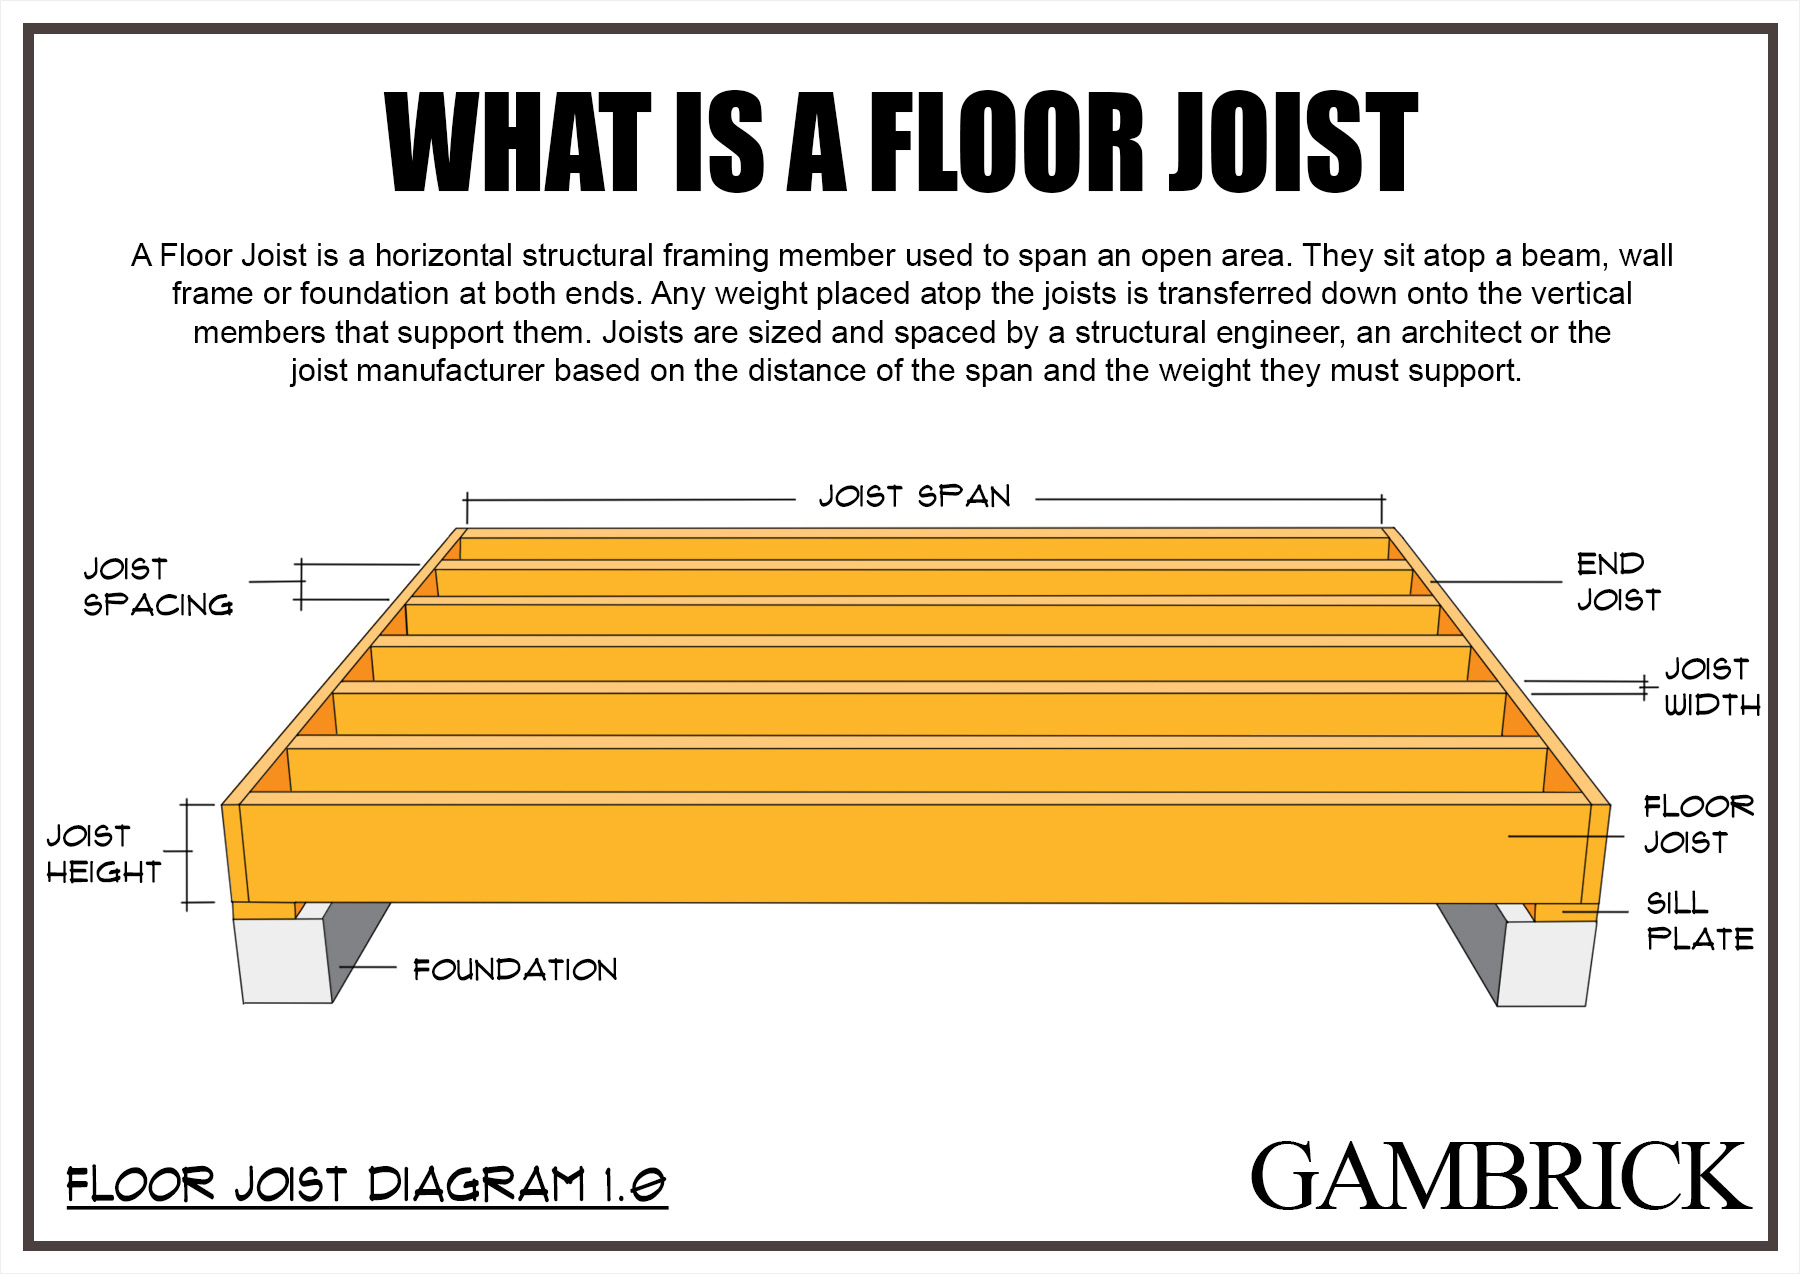 what is a floor joist drawing 1.1